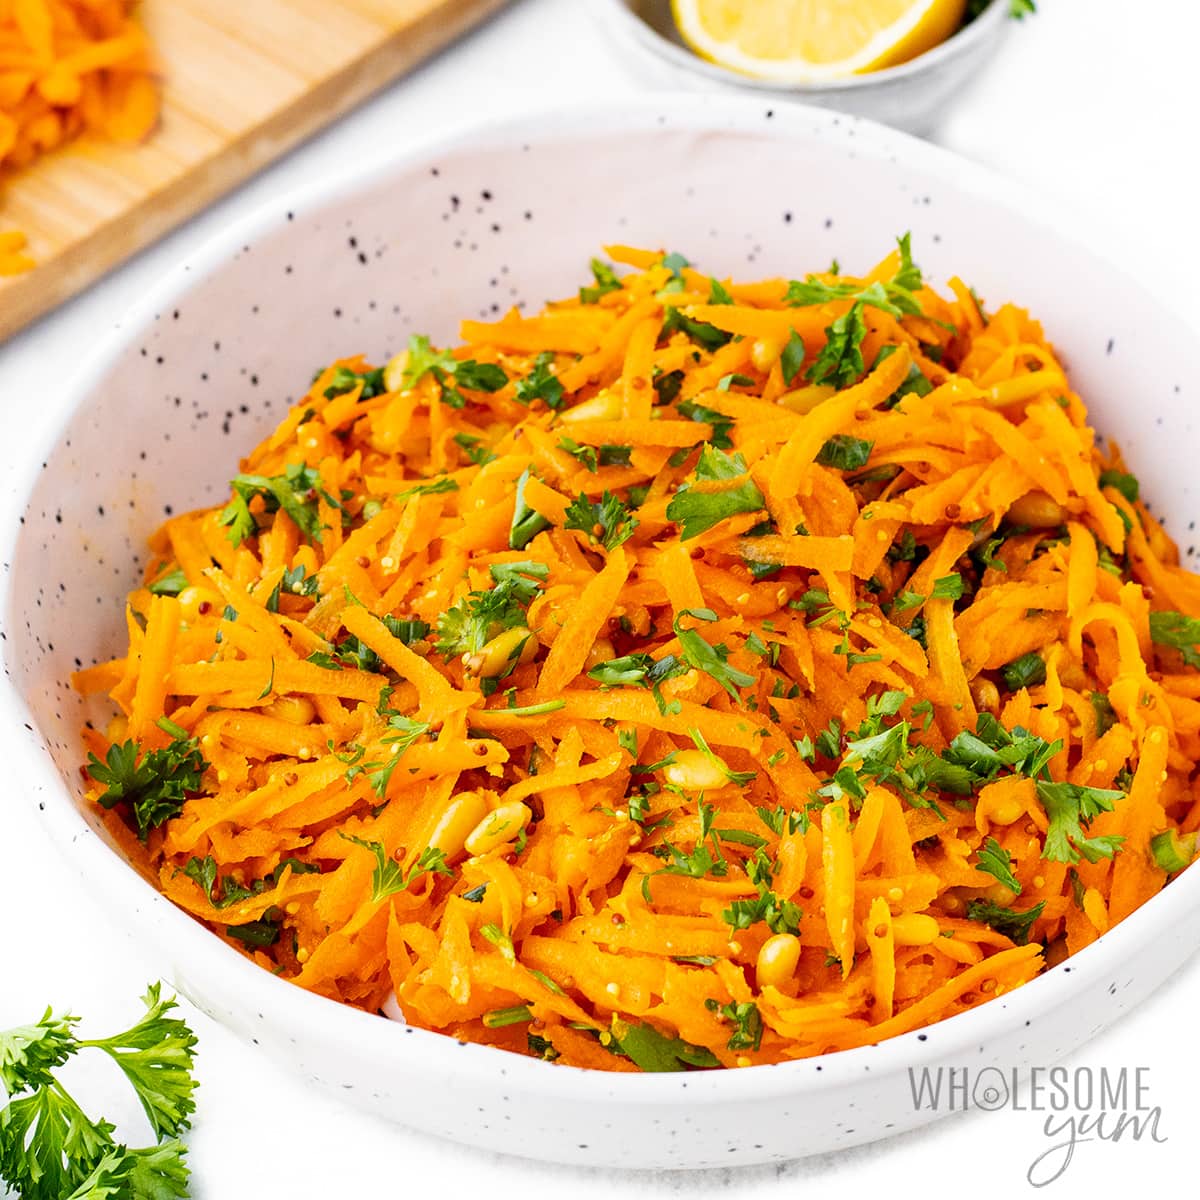 French carrot salad recipe in a bowl.